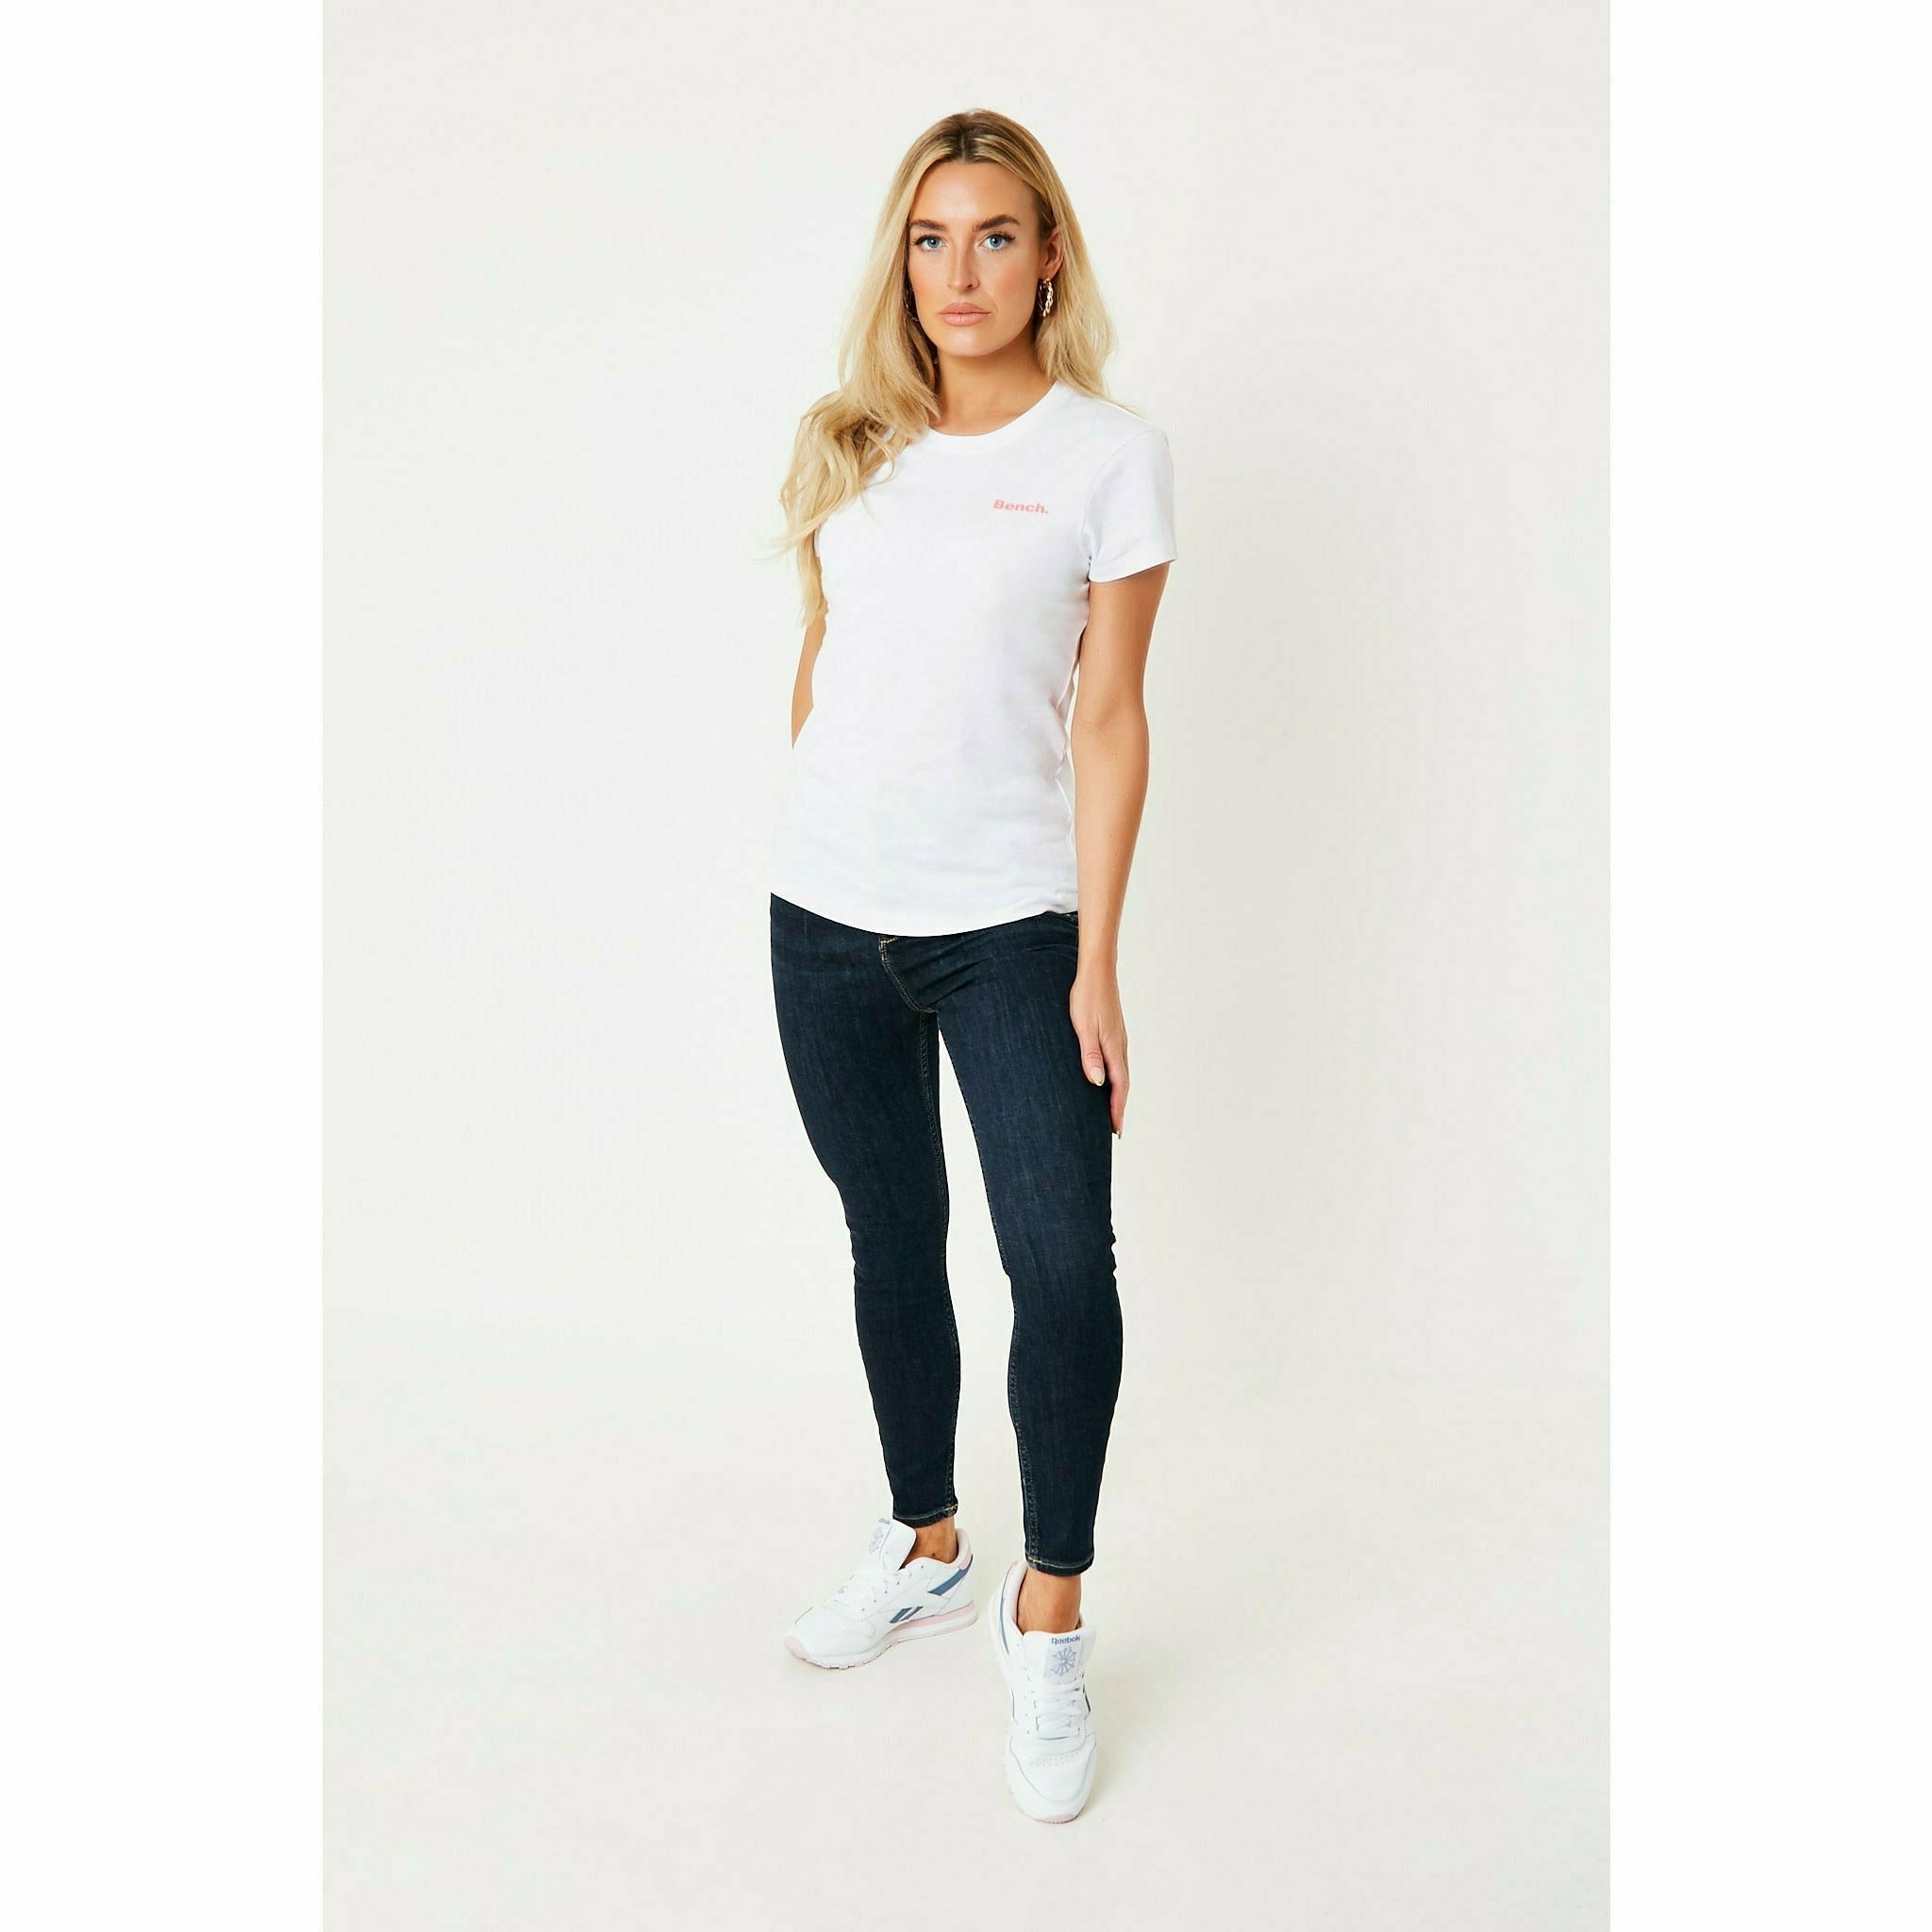 Womens 'SOFIE' 2 Pack T-Shirts - ASSORTED - Shop at www.Bench.co.uk #LoveMyHood